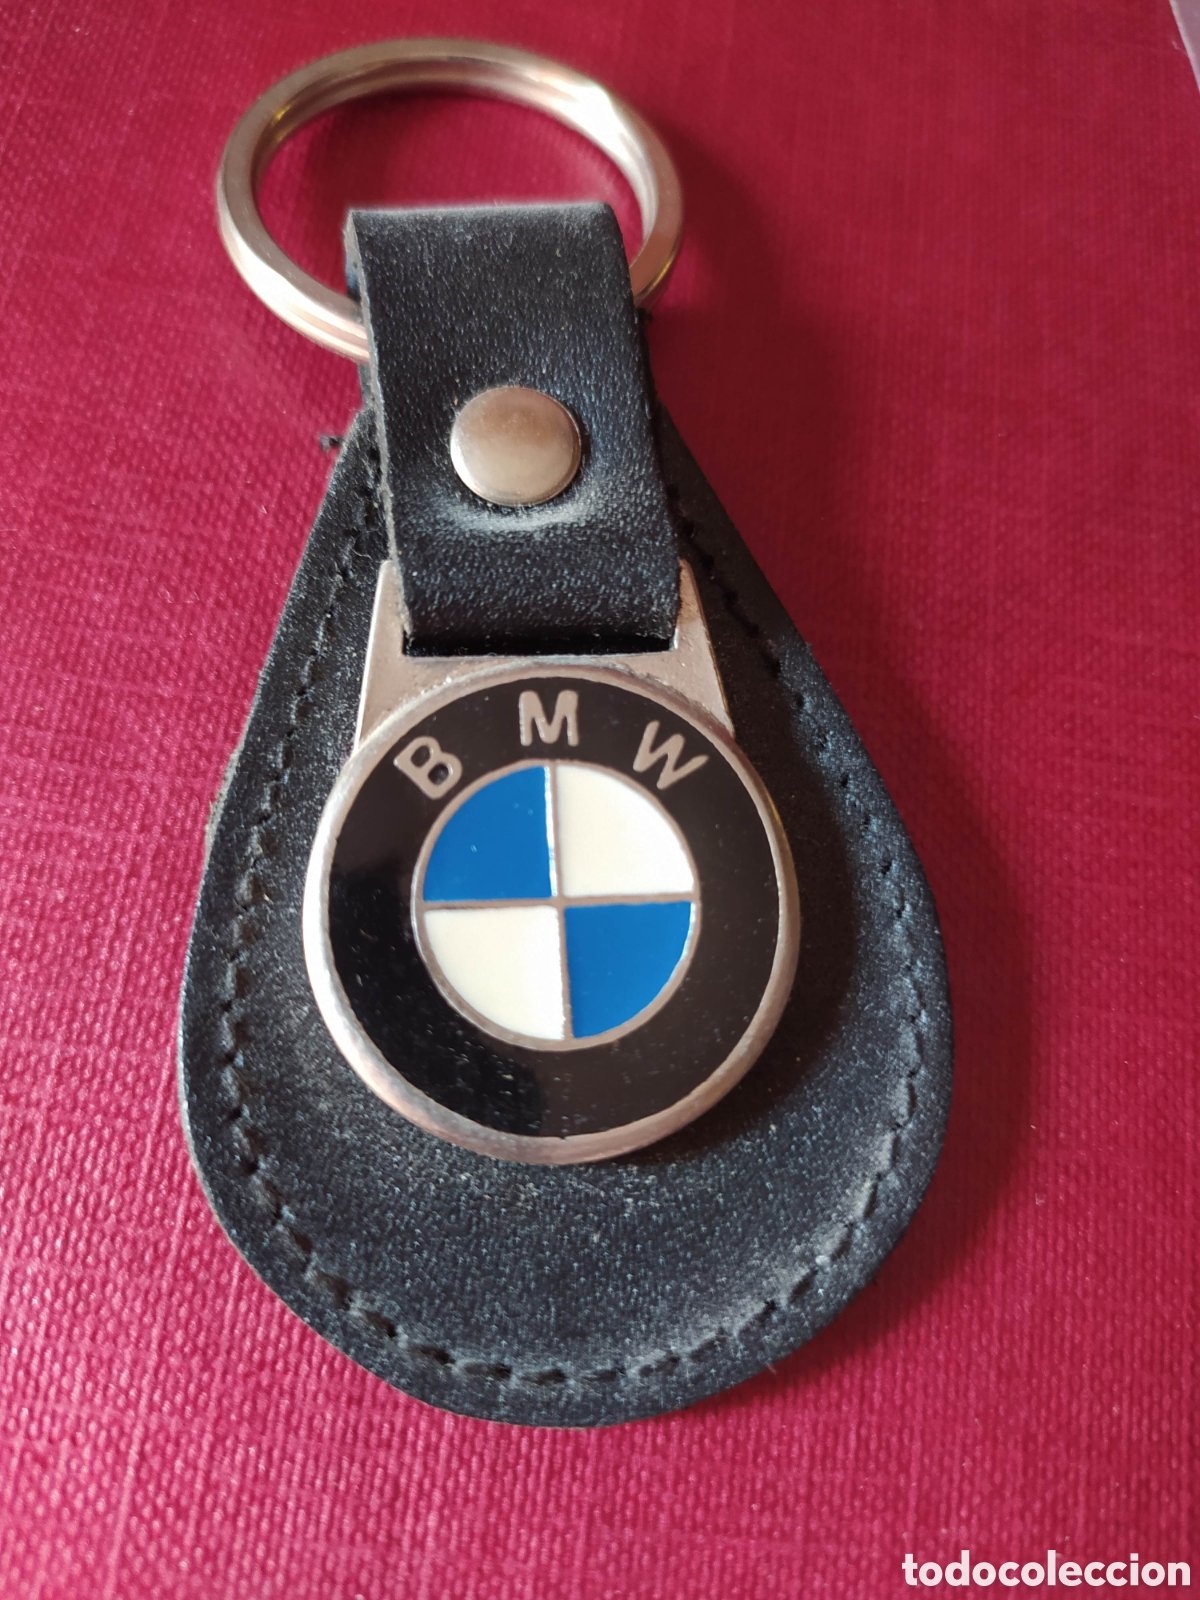 llavero bmw - Buy Antique keyrings and keychains on todocoleccion